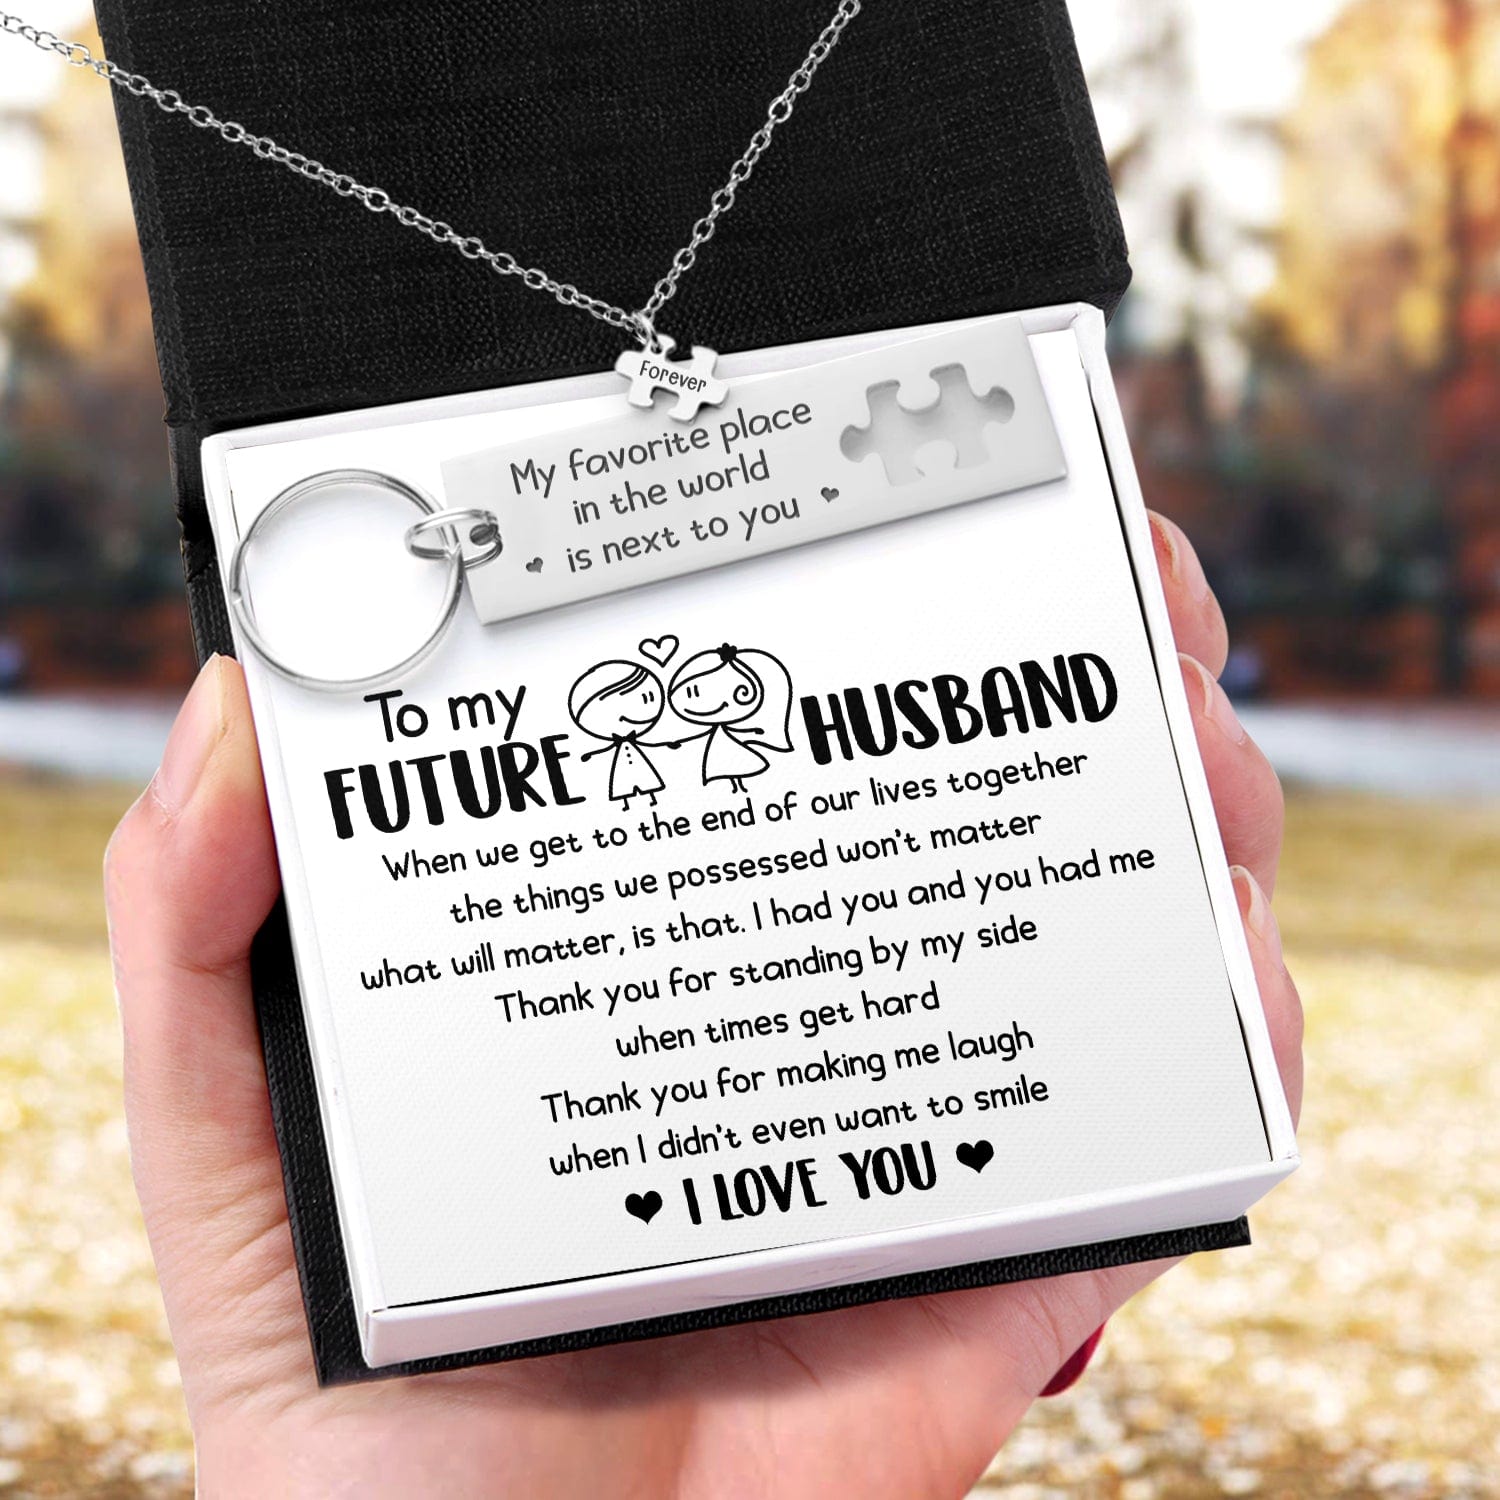 Magnetic Love Necklaces - Family - To My Girlfriend - I Love You